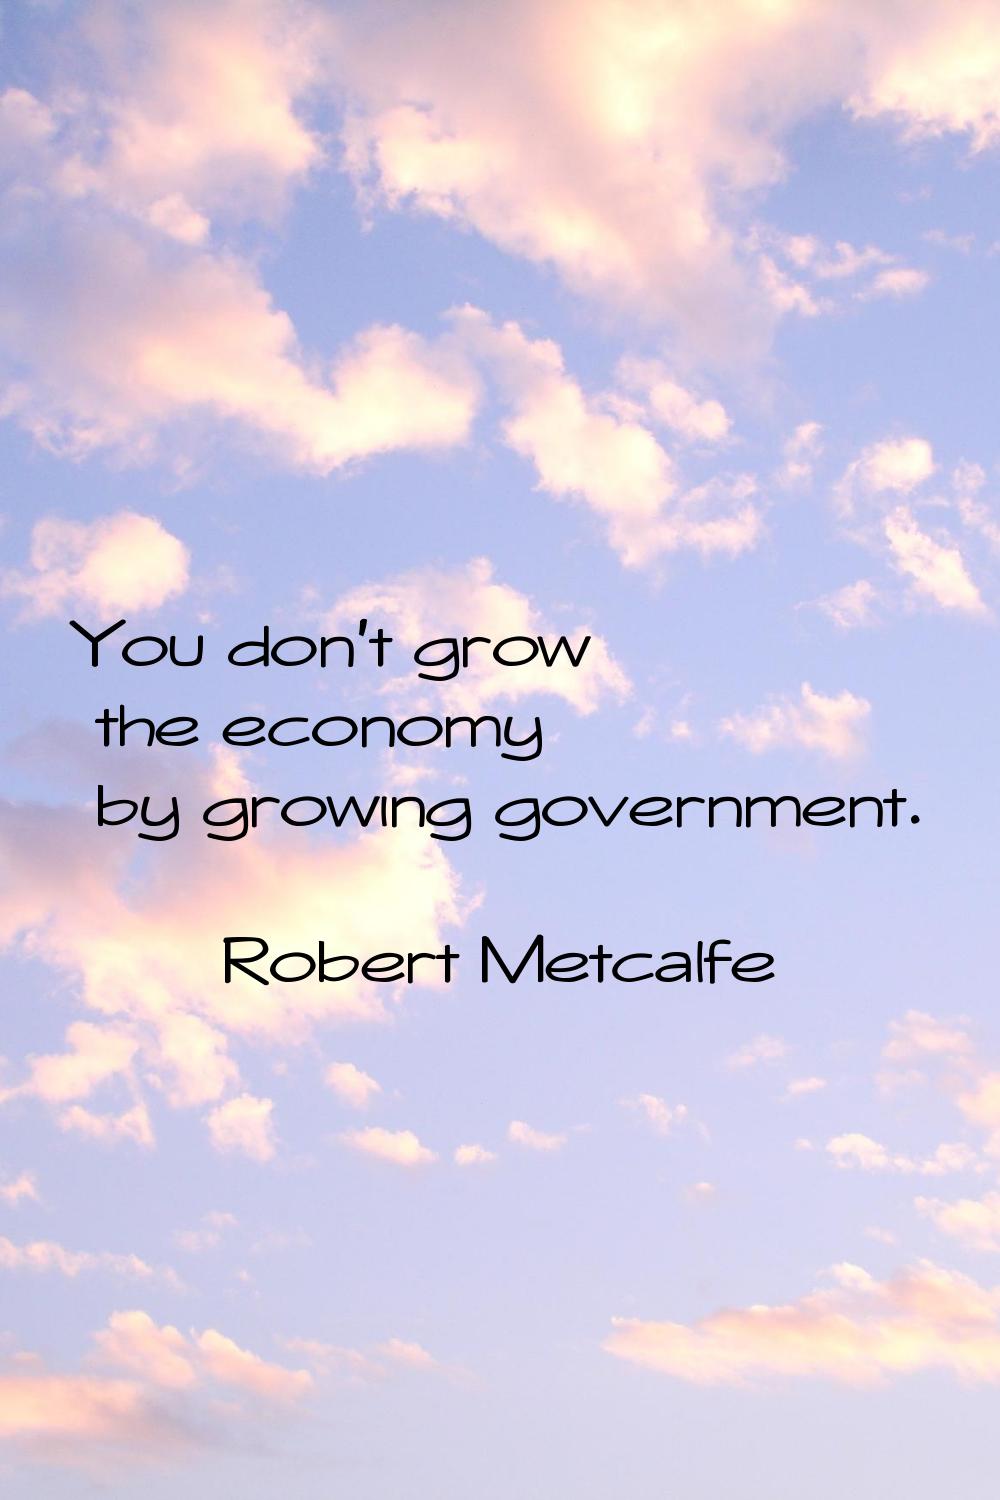 You don't grow the economy by growing government.